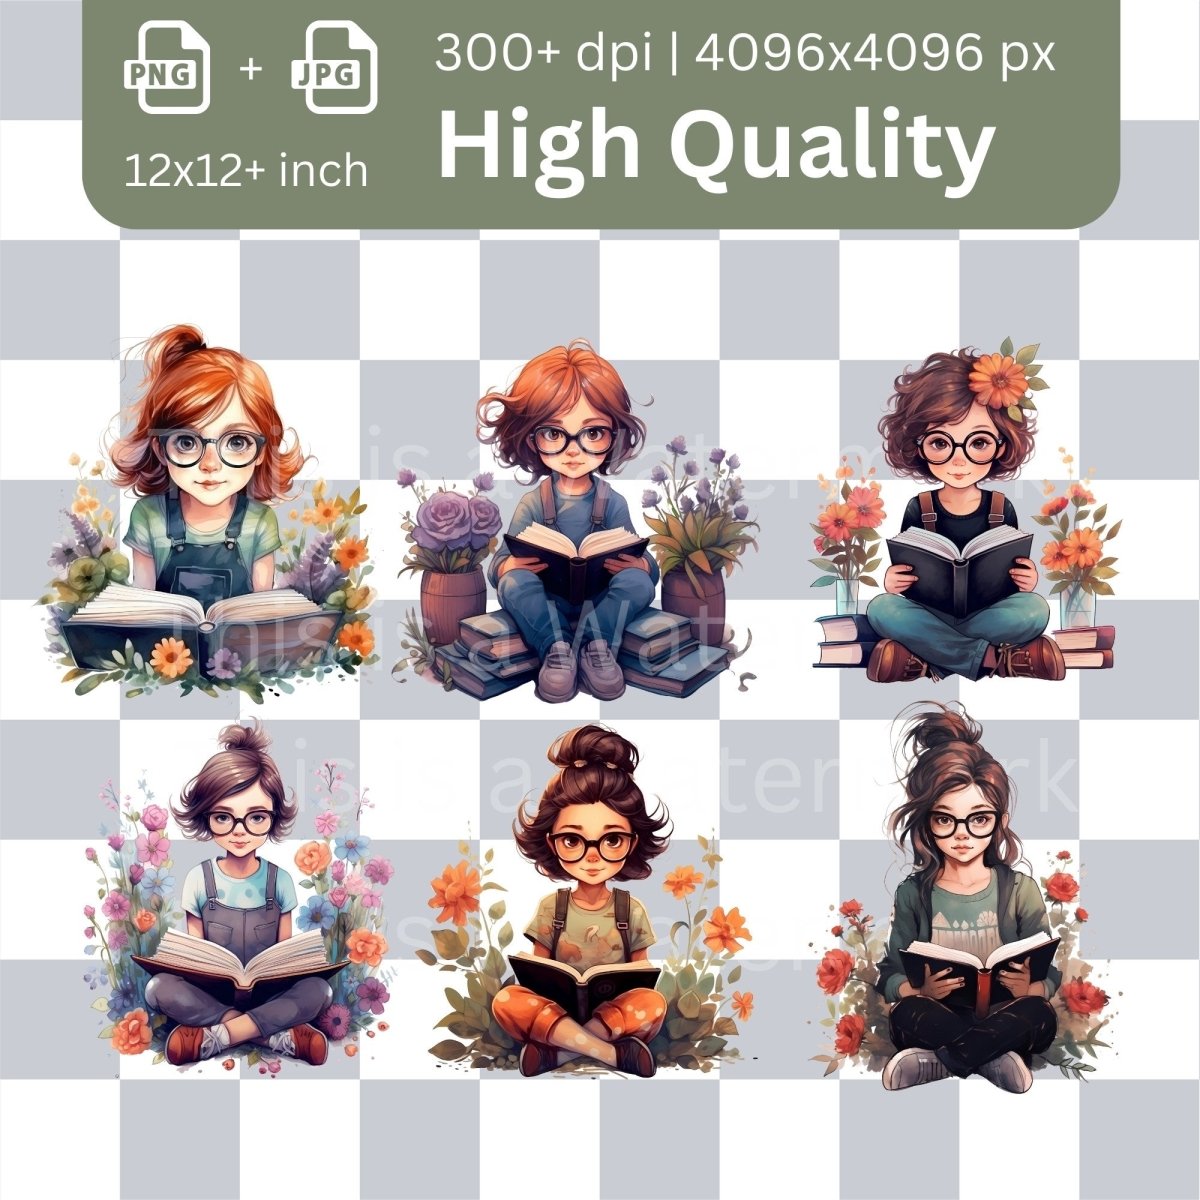 Bookworm Girls reading Megabundle 42+42 High Quality PNGs Stack of Books Clipart Nursery Card Making Clip Art Digital Paper Craft Graphic - Everything Pixel